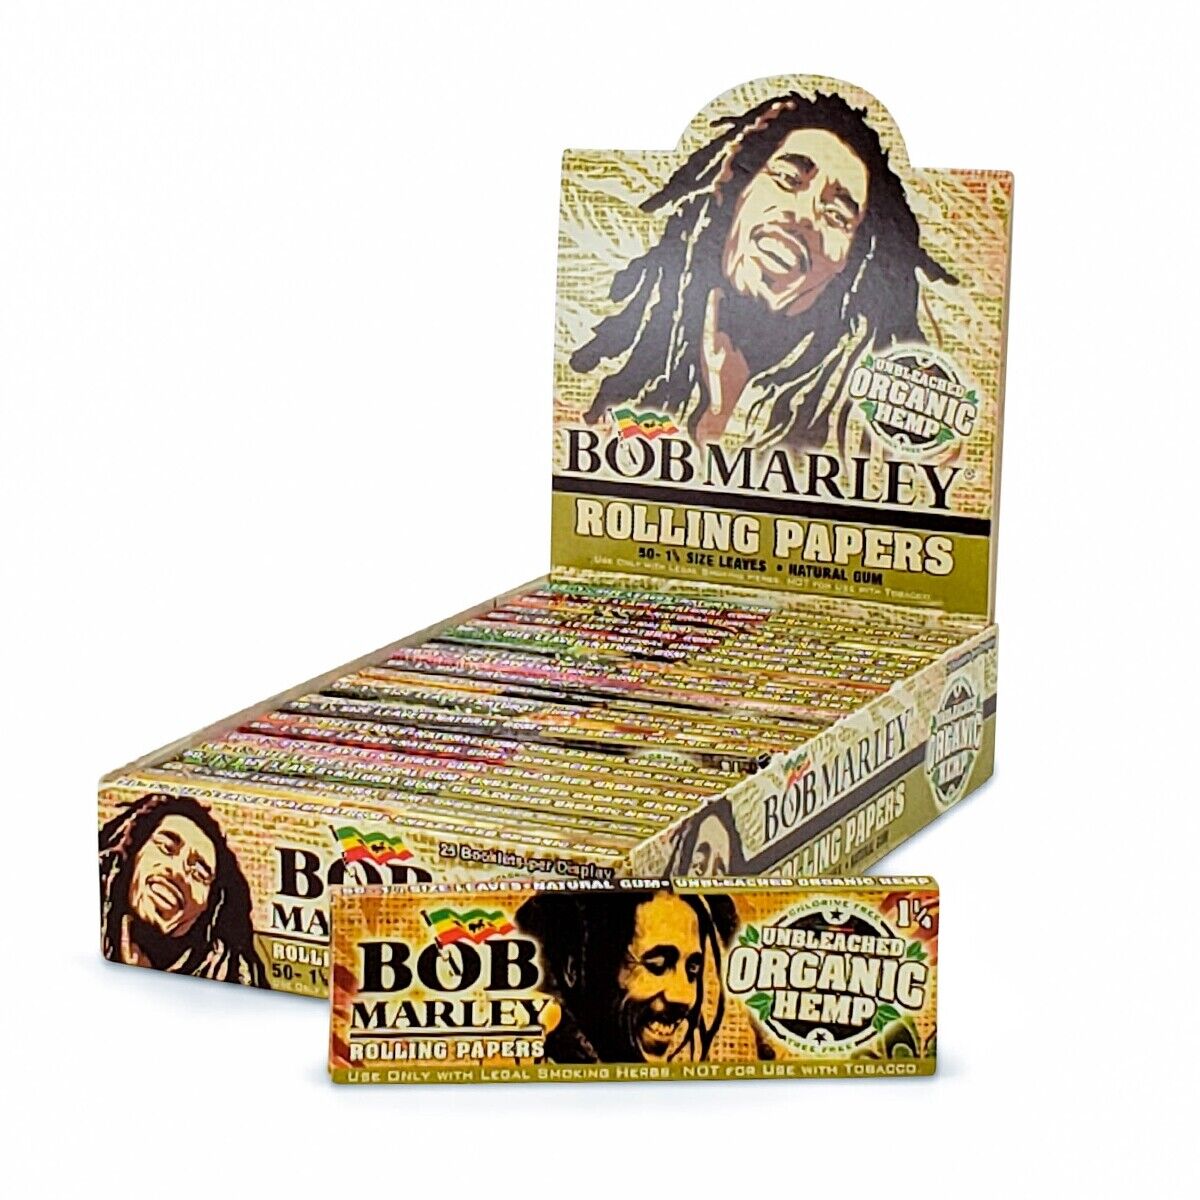 Authentic Bob Marley Unbleached Organic Hemp 1 1/4, 1.25 Rolling Papers 25 Books